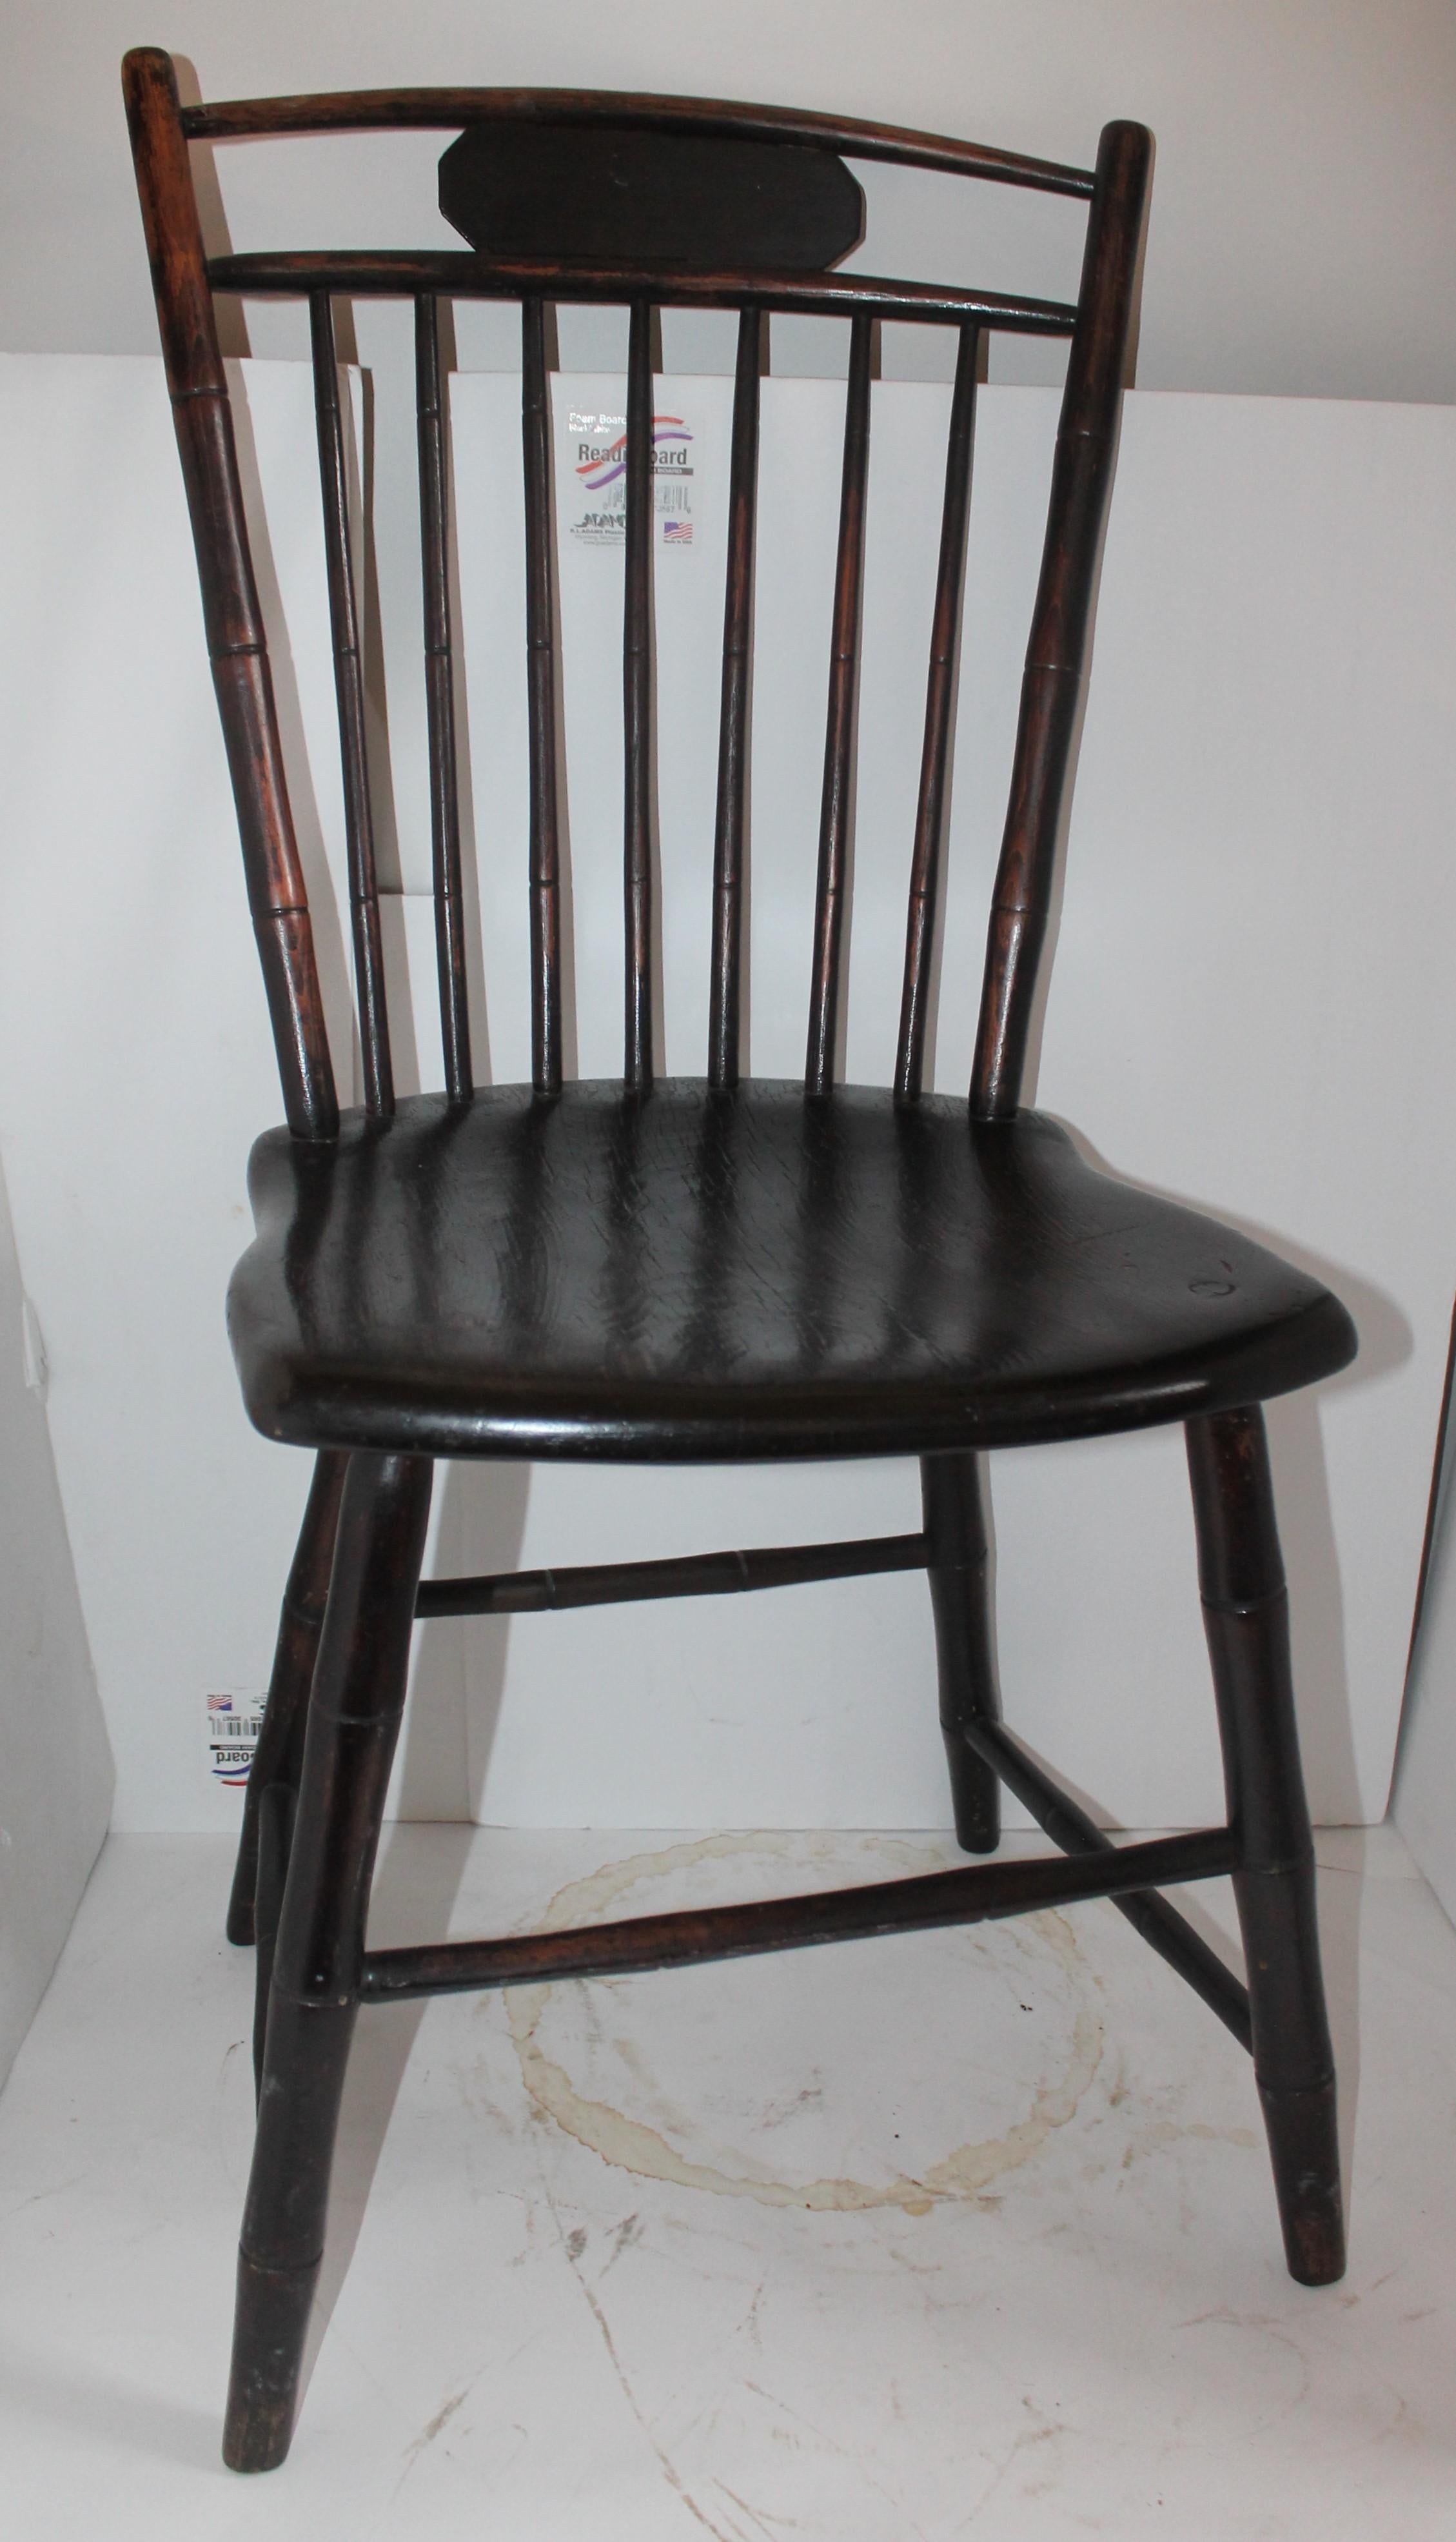 birdcage windsor chairs for sale